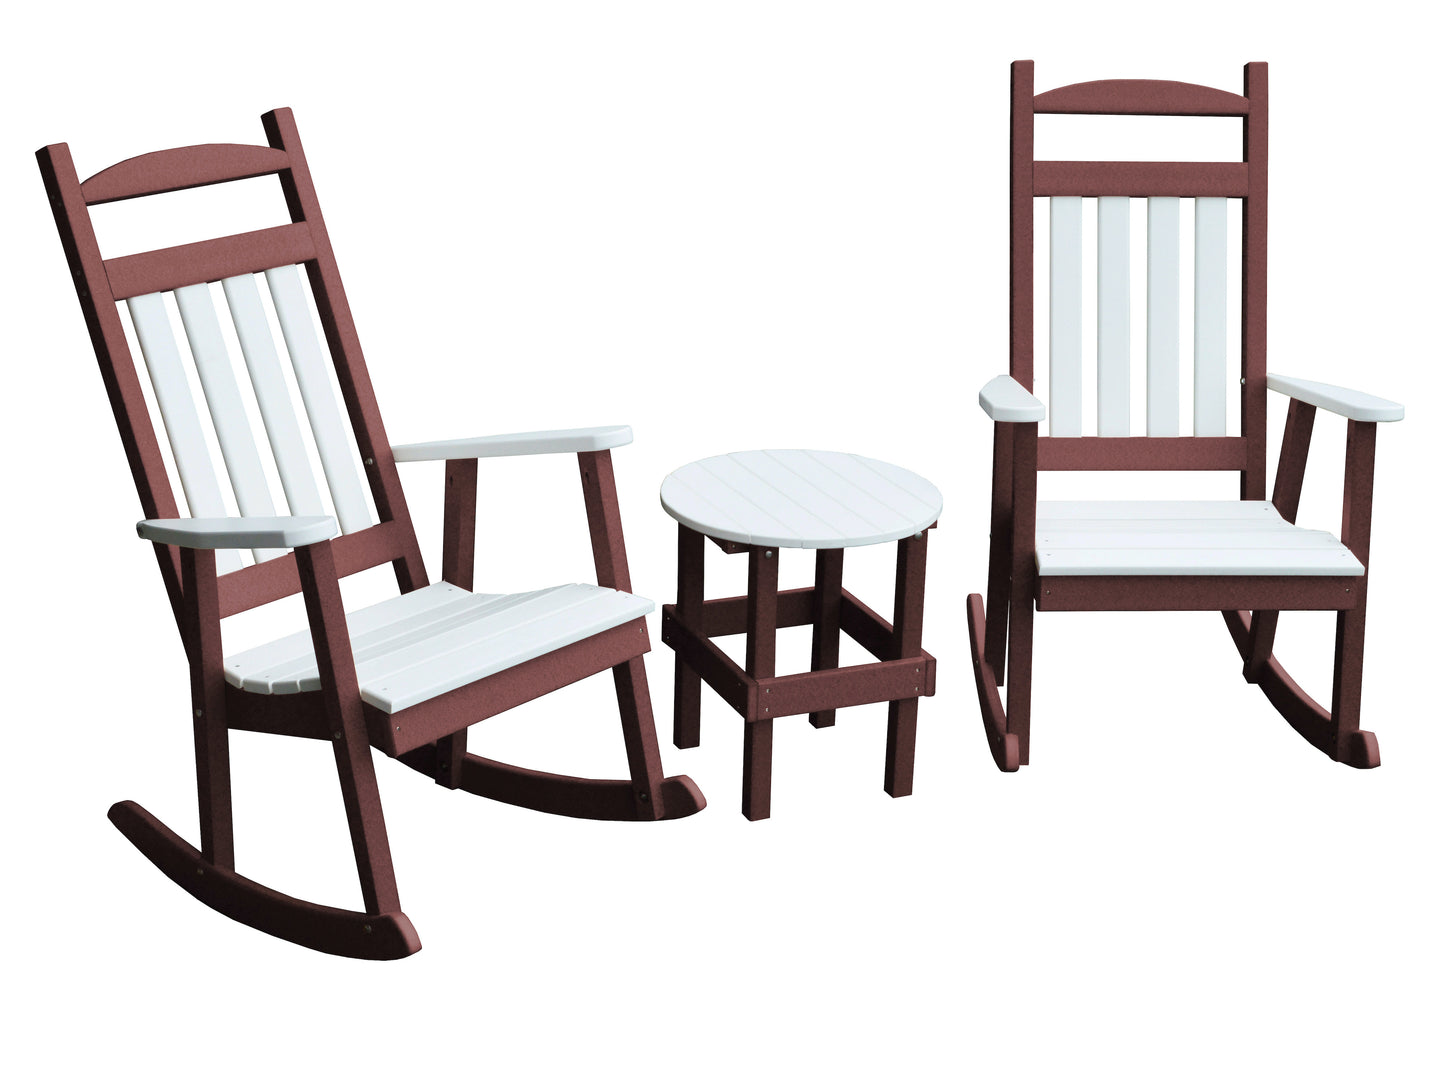 A&L Furniture Company Recycled Plastic 3 Piece Porch Rocking Chair Set w White Accents - LEAD TIME TO SHIP 10 BUSINESS DAYS